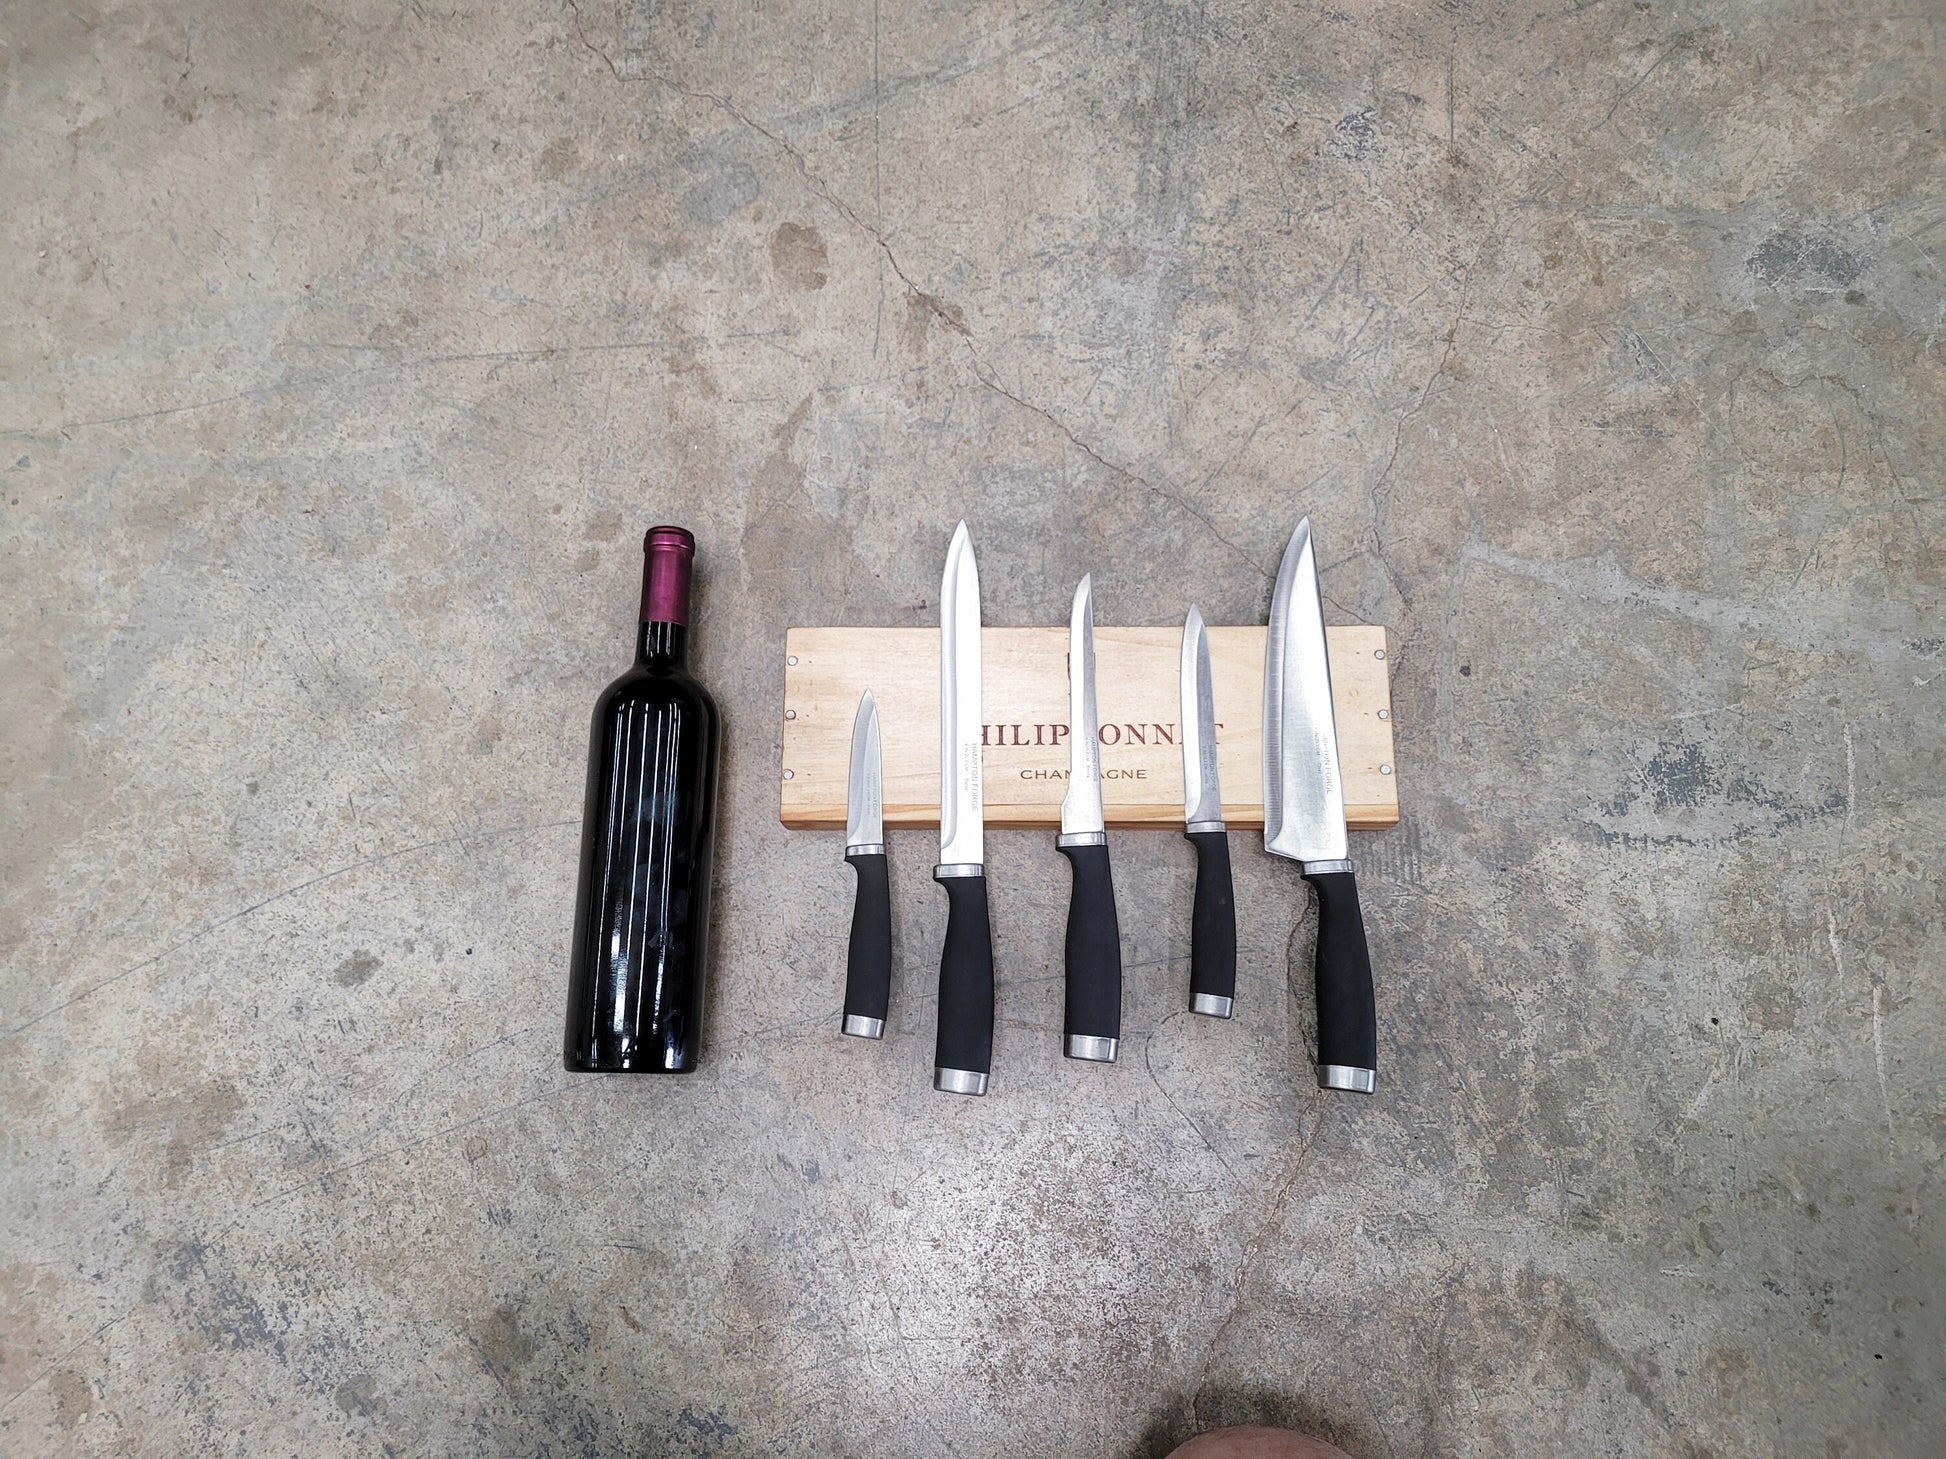 Wine Crate Magnetic Knife Rack Made from retired Philipponnat Champagne Box - 100% Recycled!